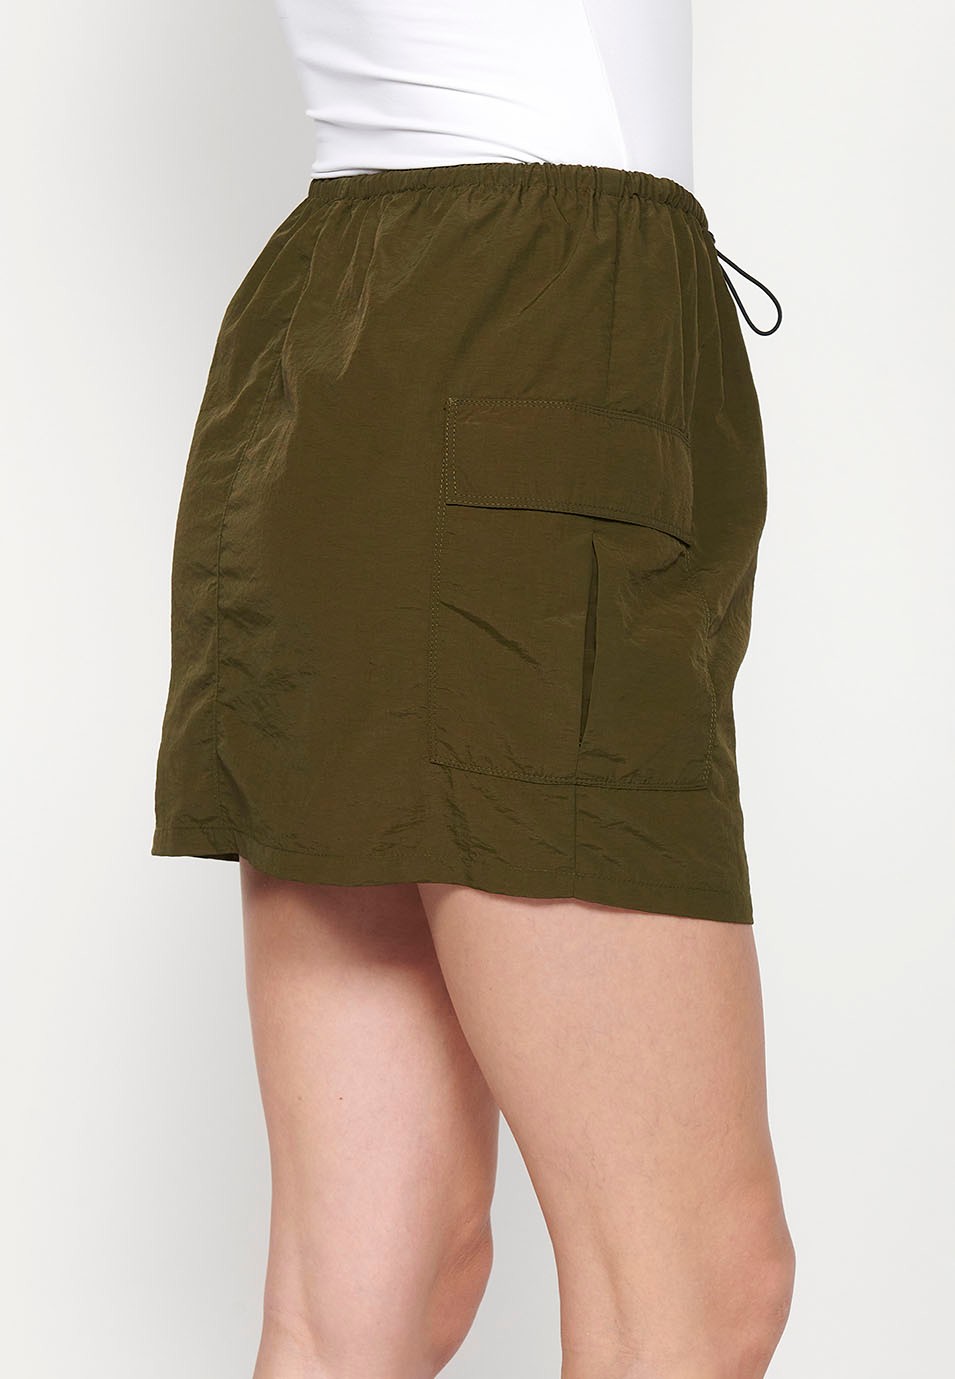 Short skirt with adjustable waist and pockets, khaki color for women